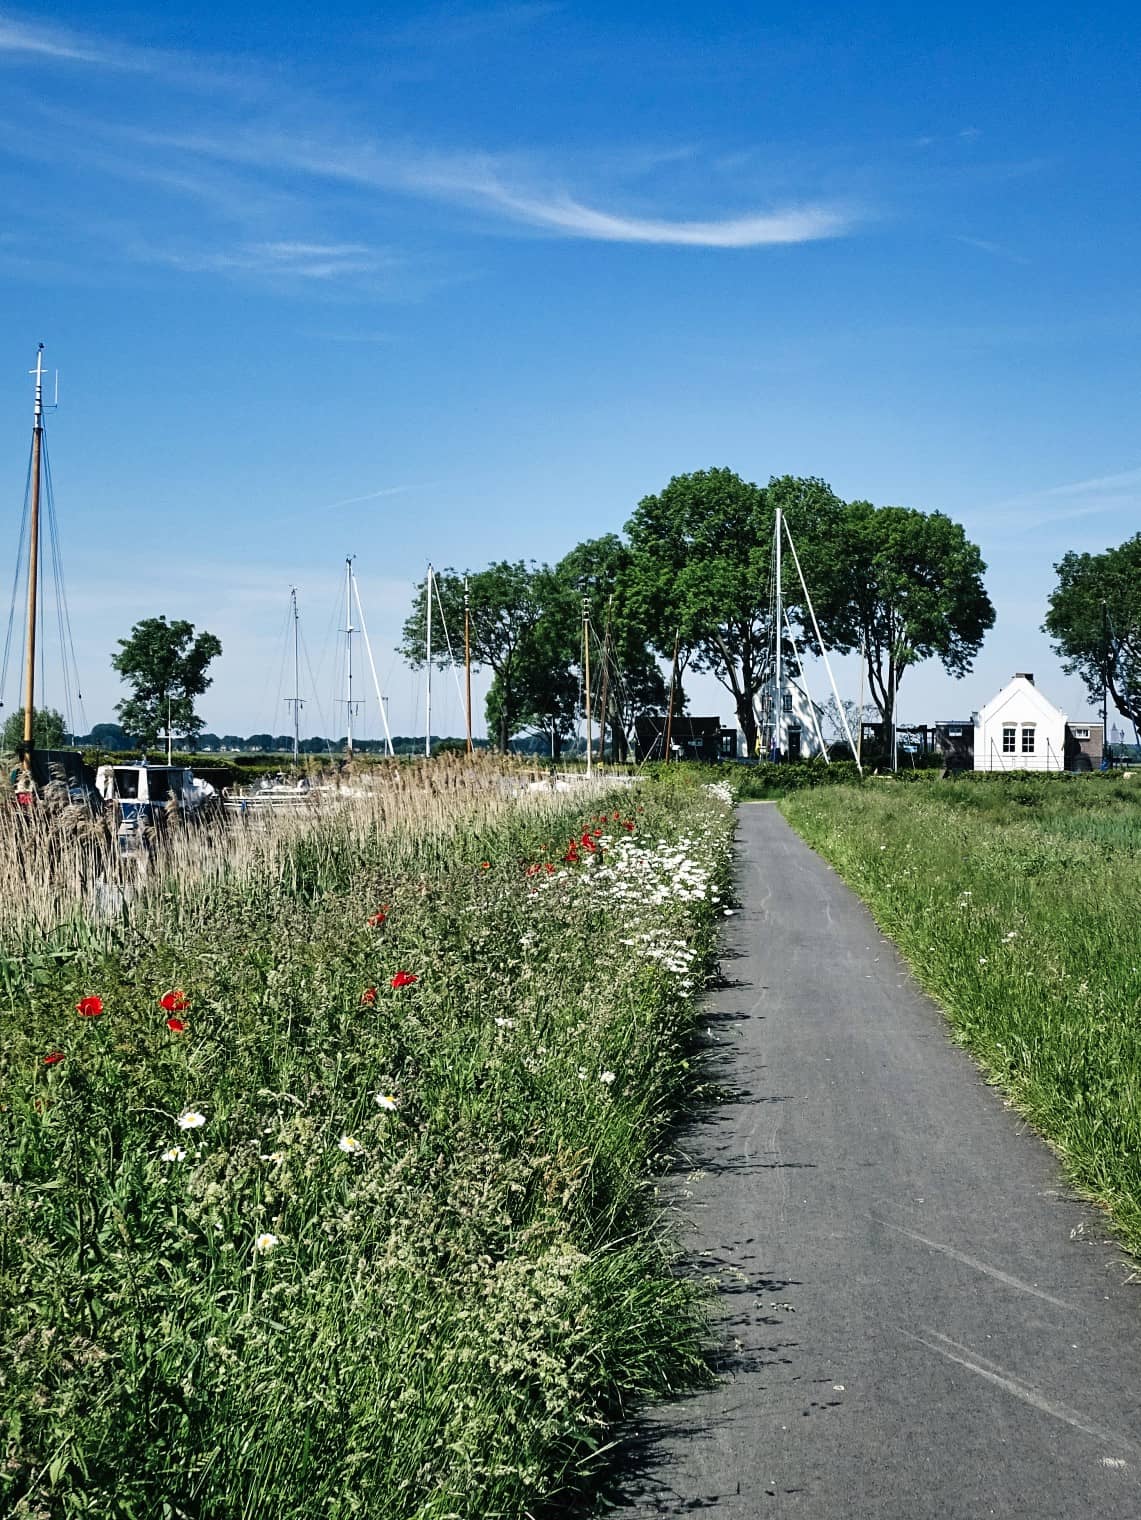 Cycling in your favorite landscape with Fietsroutes in beeld